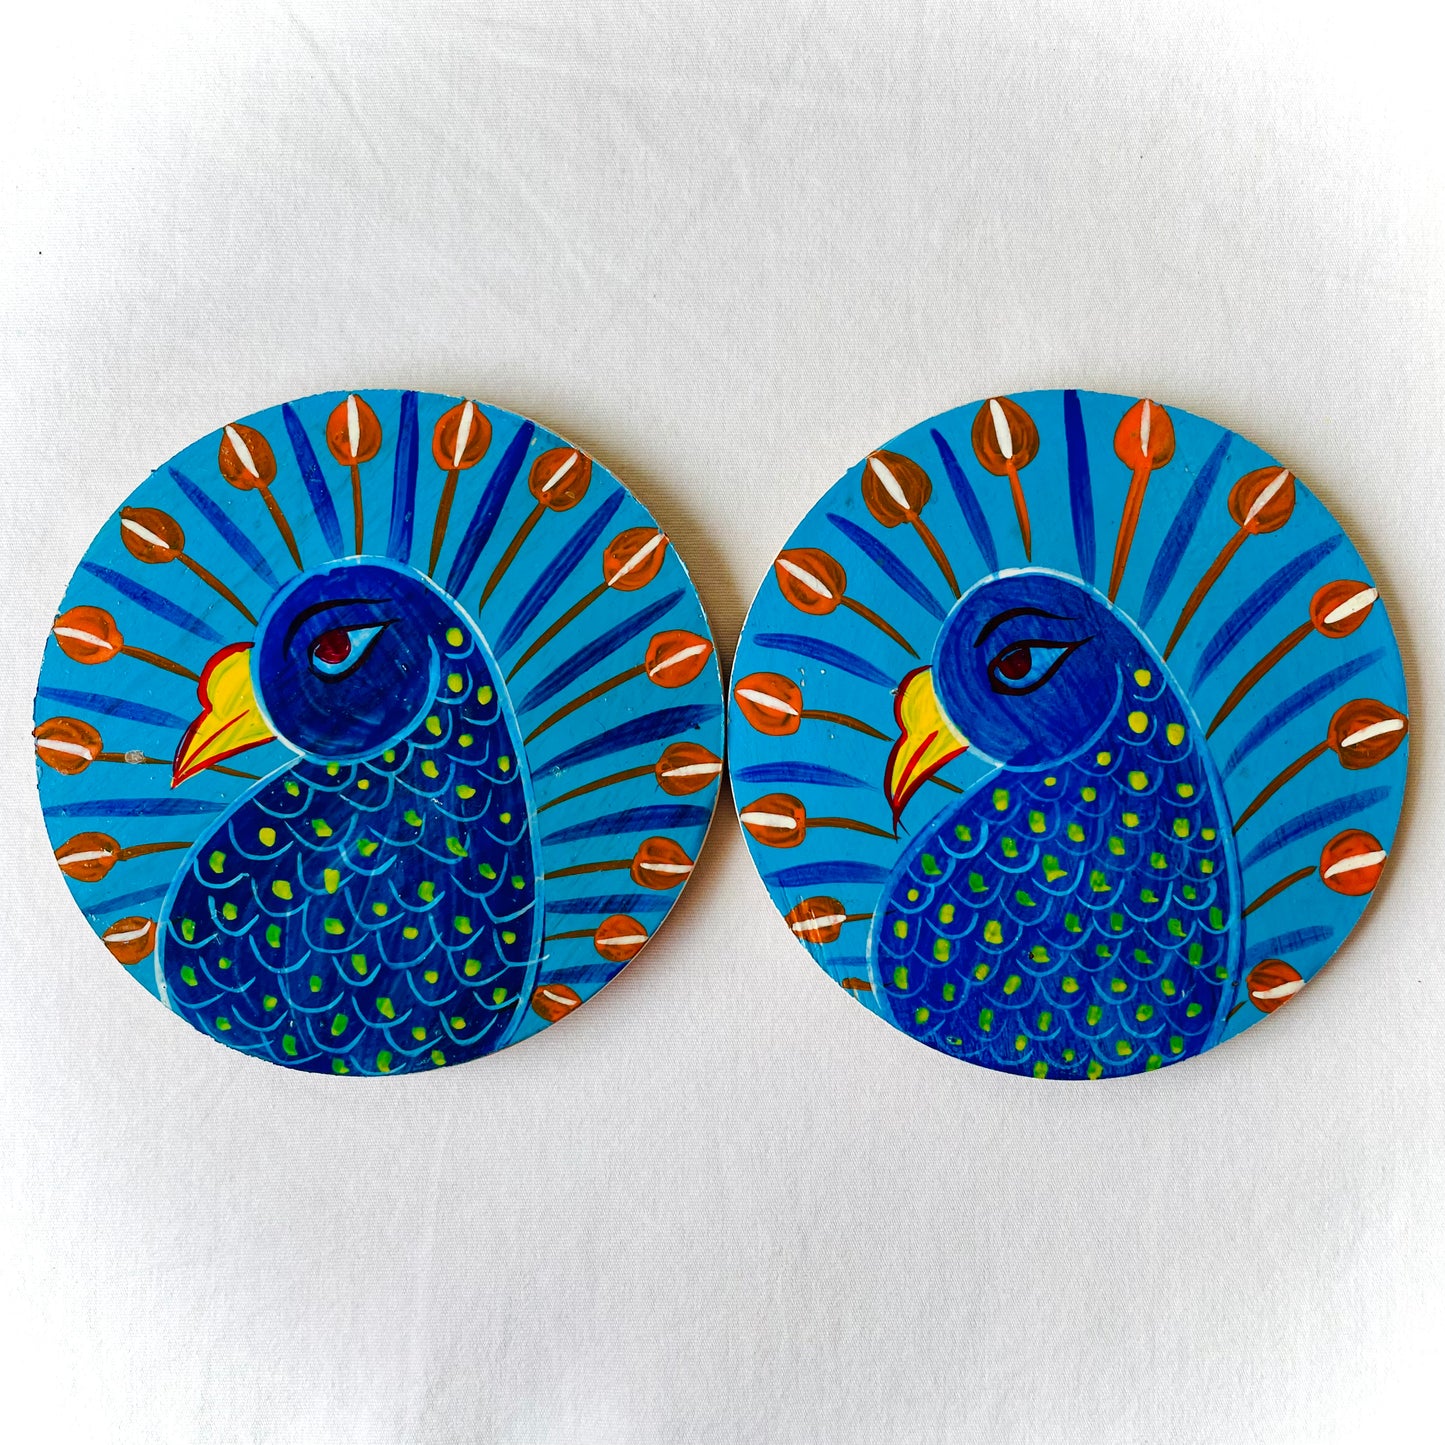 Two round wood coasters displayed against a white background, feature two peacocks with blue bodies, red feathers and yellow beaks